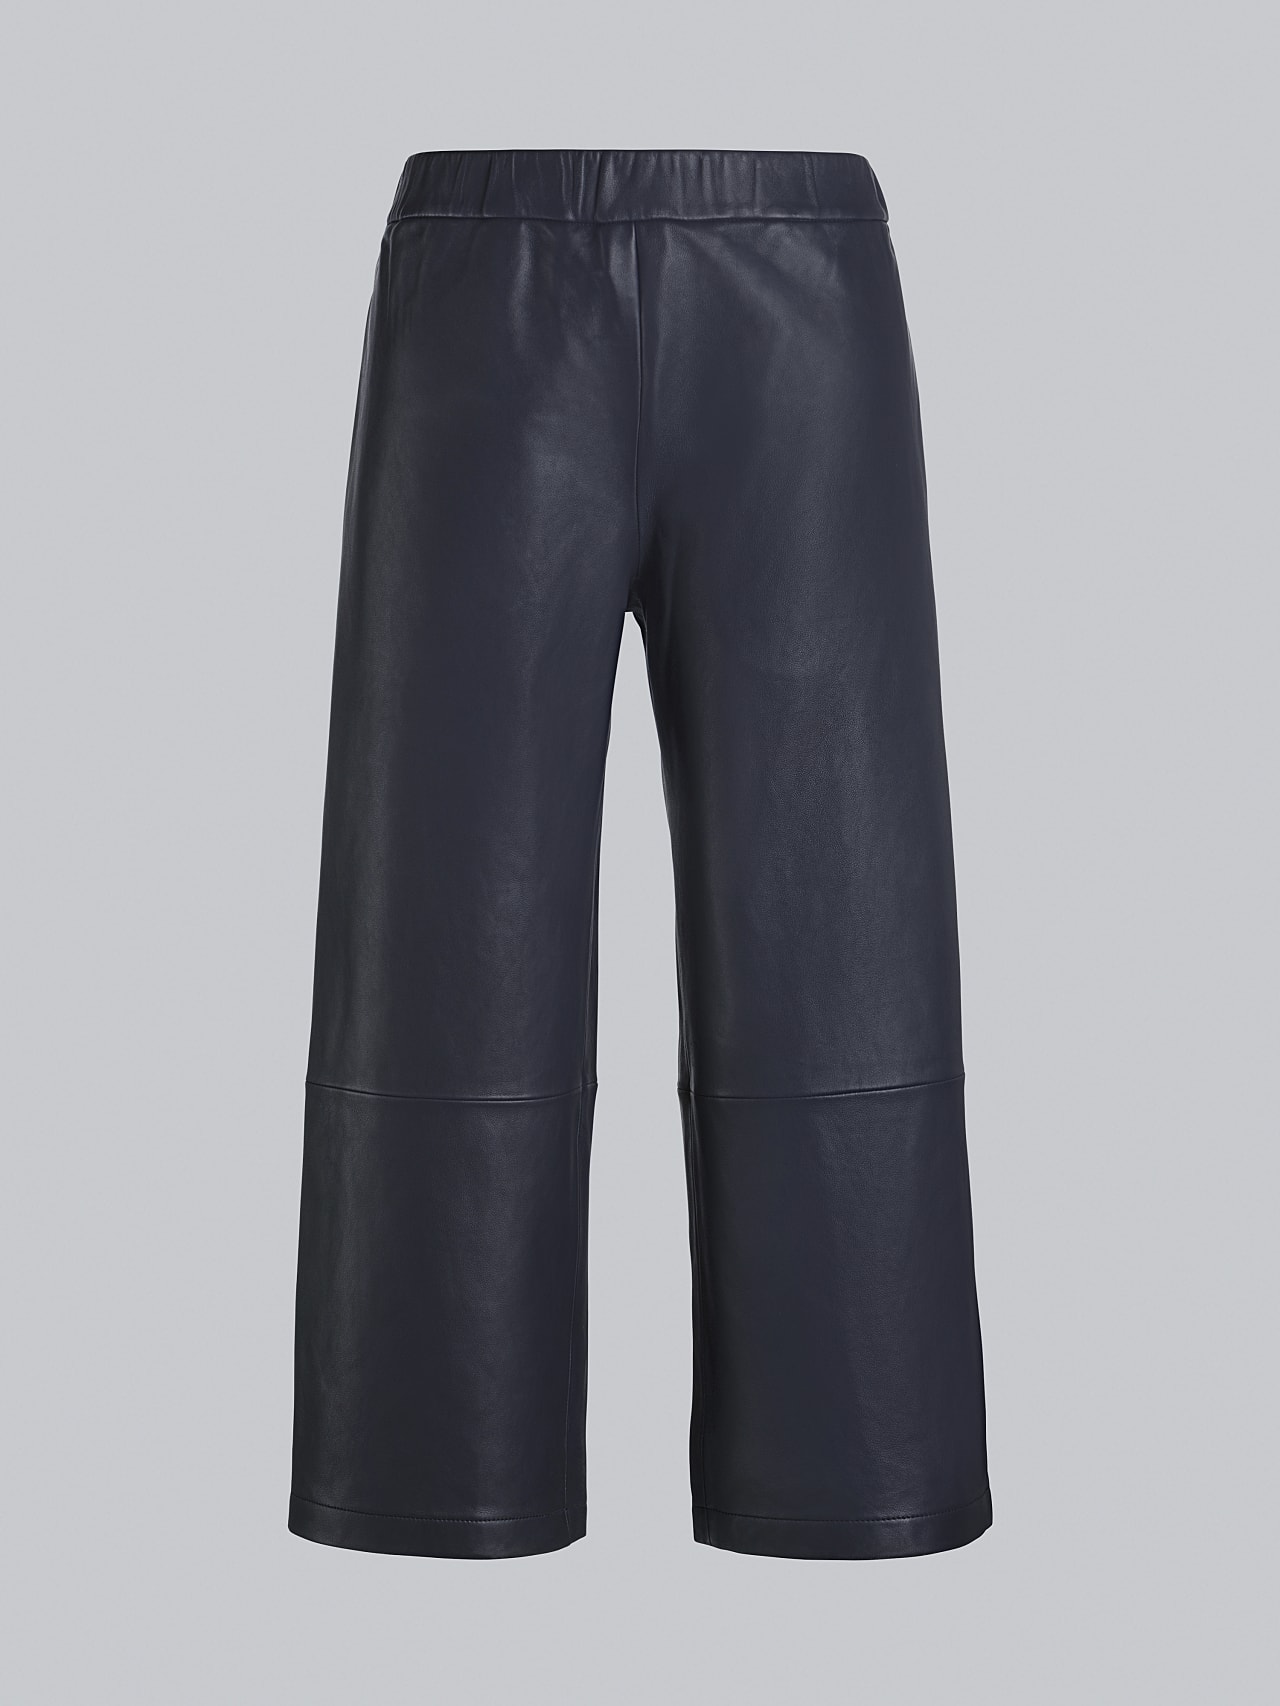 AlphaTauri | LANIA V1.Y5.02 | Leather Culottes in navy for Women